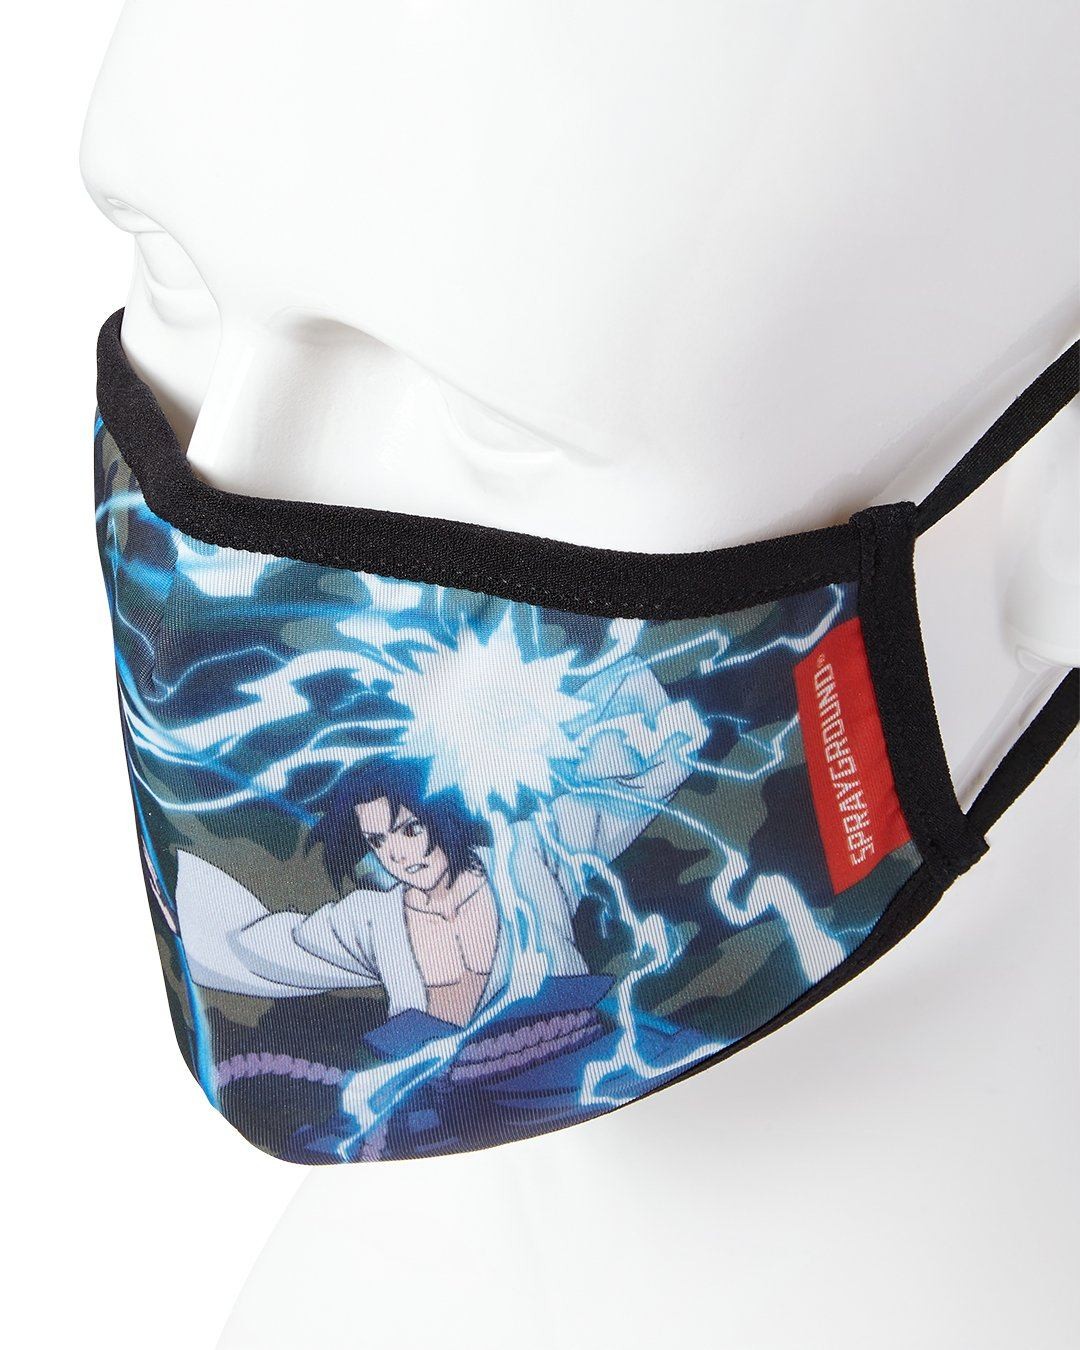 Discount | Adult Naruto Vs Sasuke Form Fitting Face-Covering Sprayground Sale - Discount | Adult Naruto Vs Sasuke Form Fitting Face-Covering Sprayground Sale-01-2